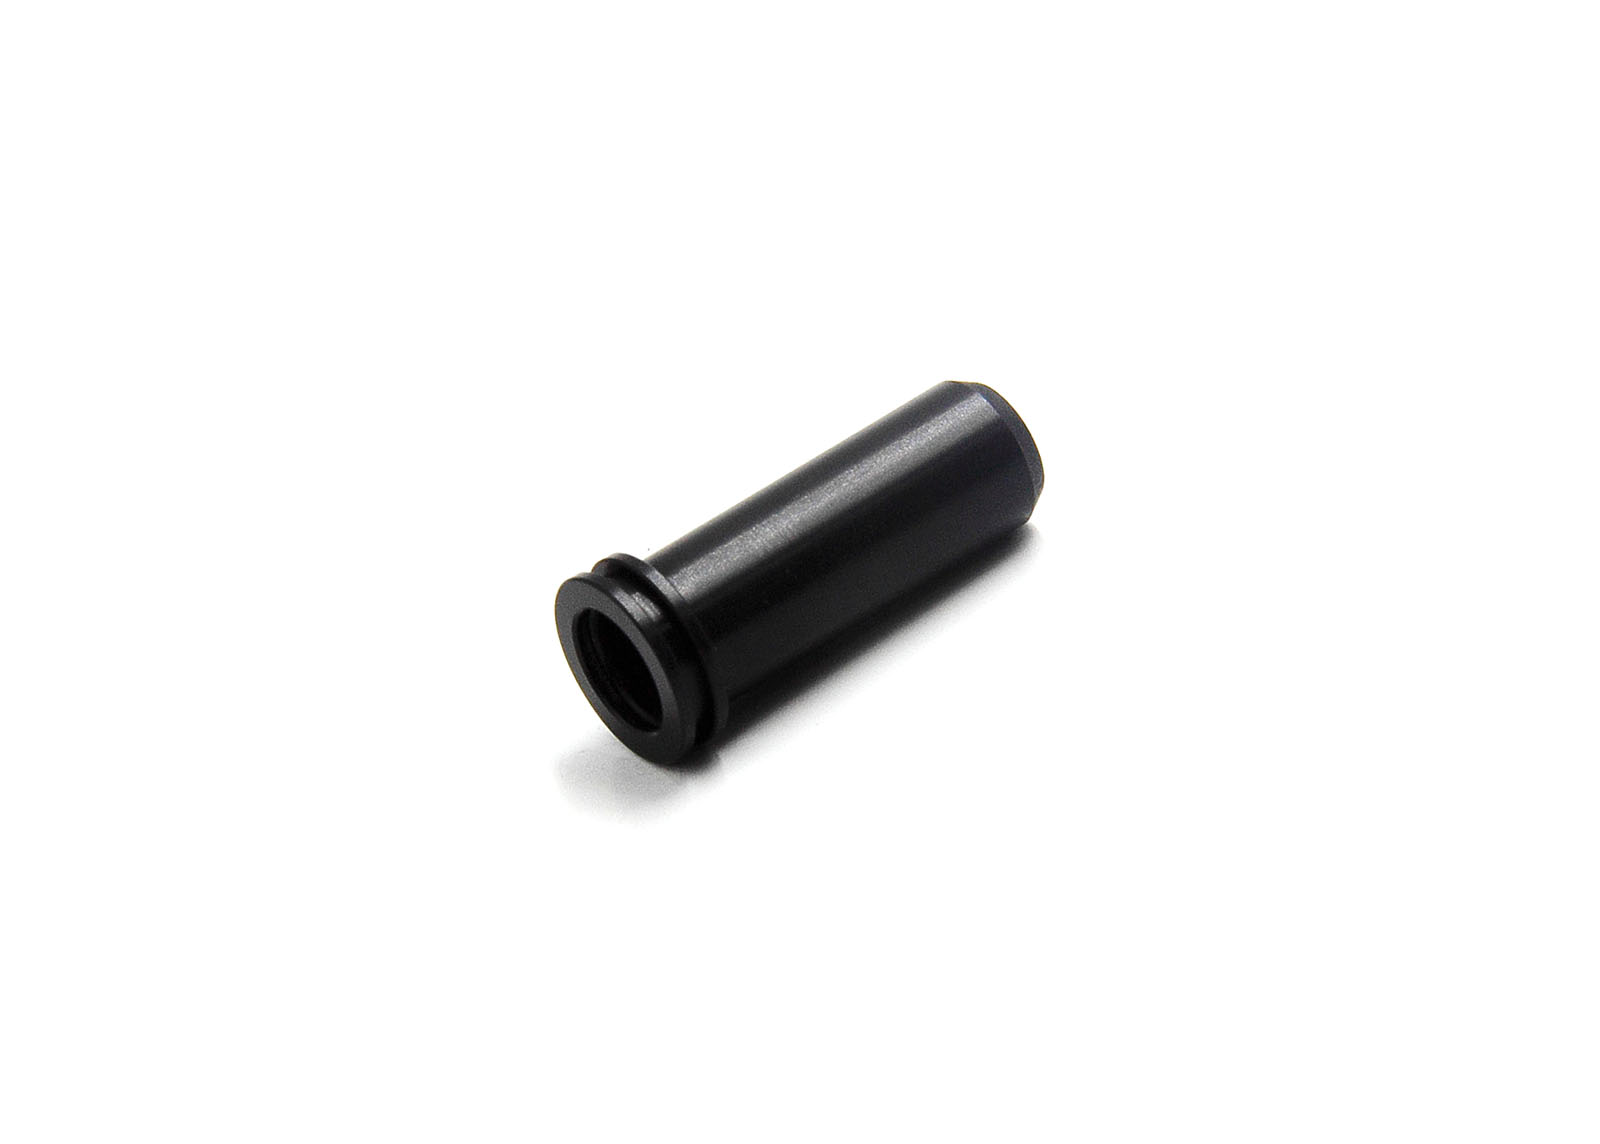 Bore up Air Seal Nozzle for MP5K-PDW - Modify Airsoft parts